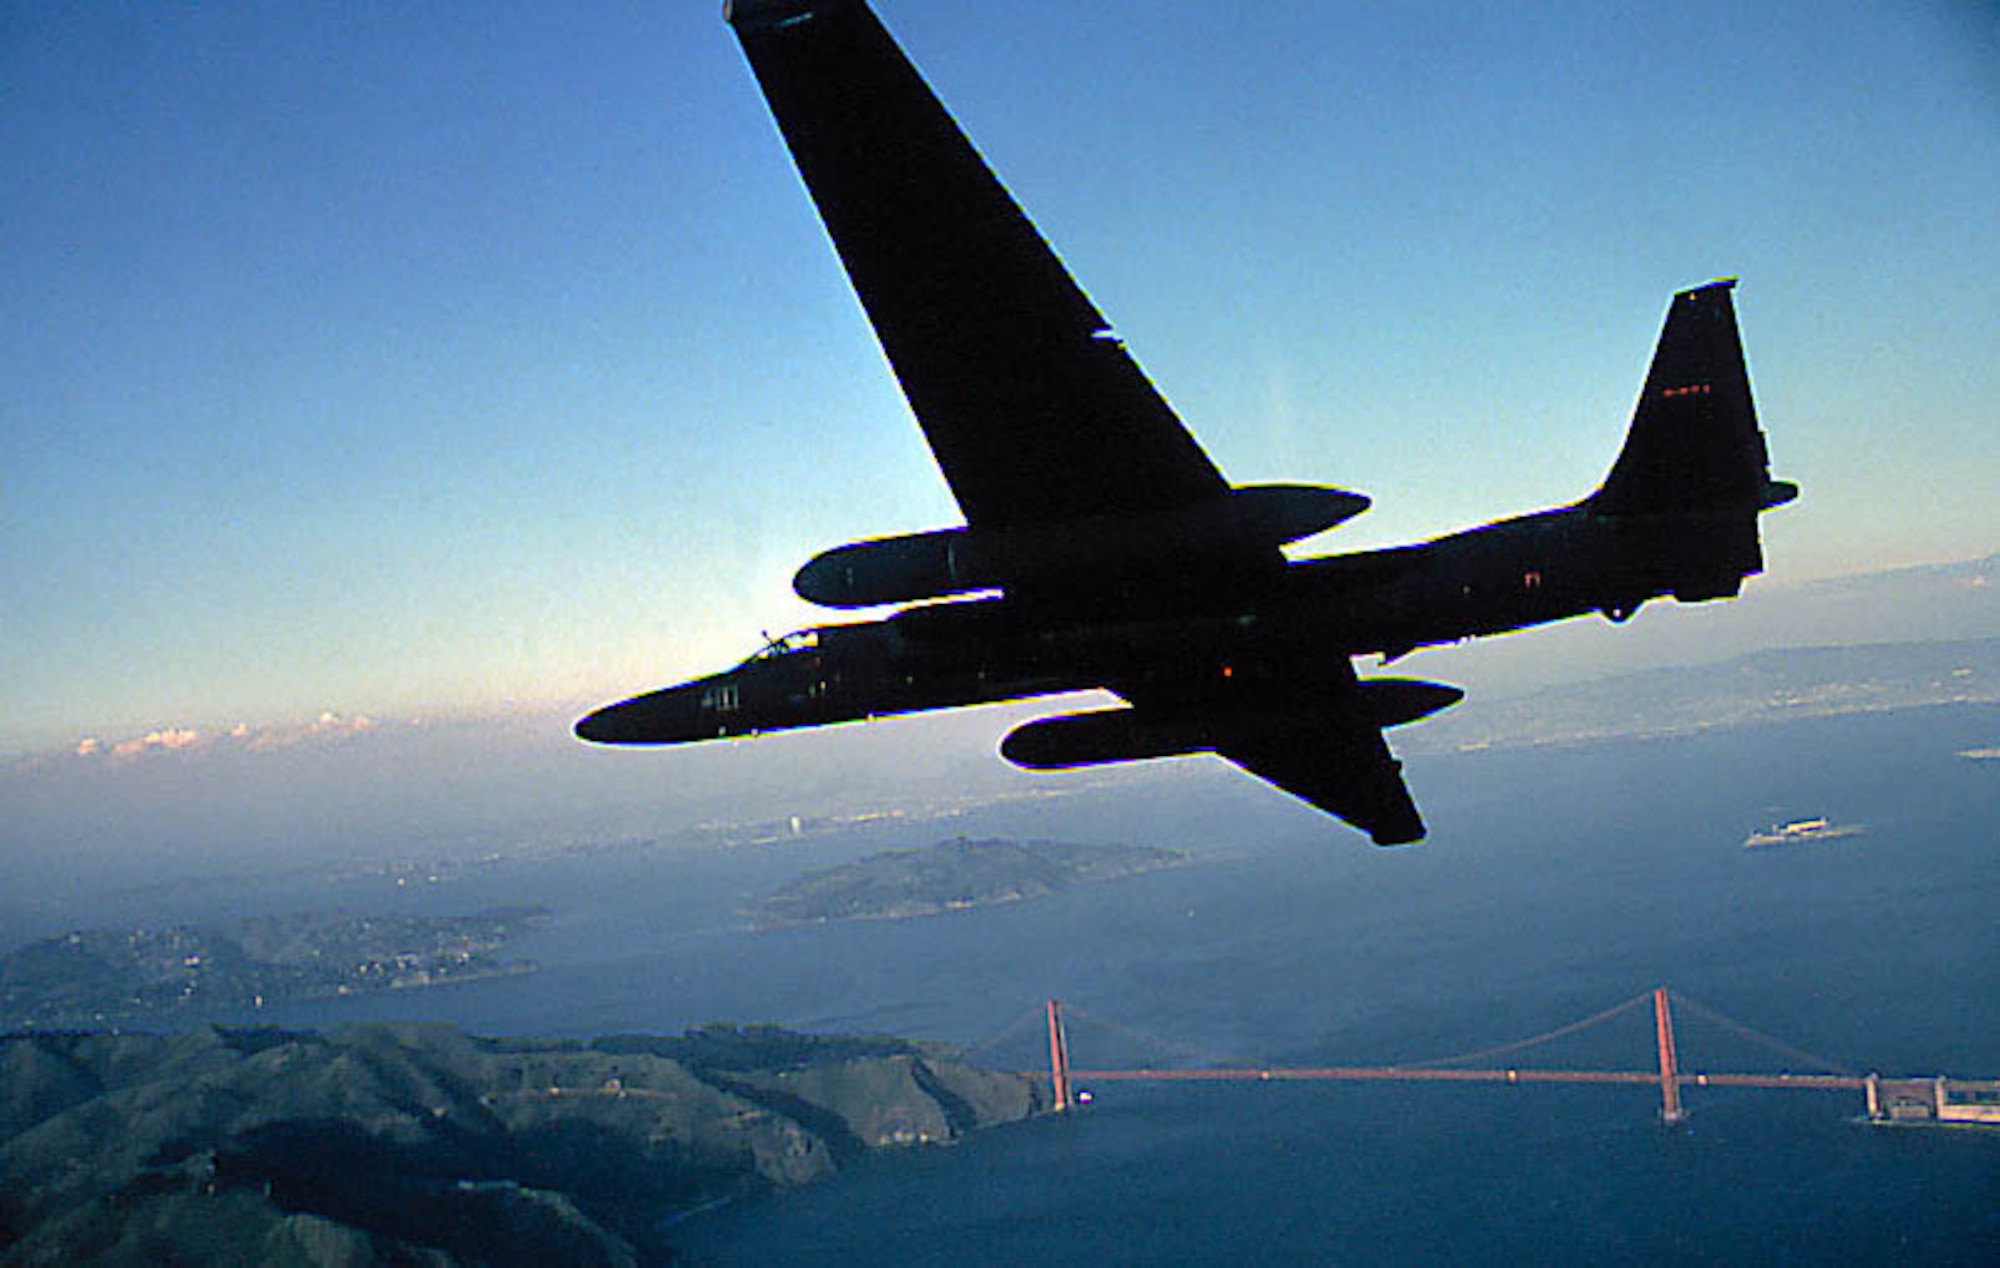 FILE PHOTO -- The U-2 is a single-seat, single-engine, high-altitude, reconnaissance aircraft. Long, wide, straight wings give the U-2 glider-like characteristics. It can carry a variety of sensors and cameras, is an extremely reliable reconnaissance aircraft, and enjoys a high mission completion rate. Because of its high altitude mission, the pilot must wear a full pressure suit. The U-2 is capable of collecting multi-sensor photo, electro-optic, infrared and radar imagery, as well as performing other types of reconnaissance functions. However, the aircraft can be a difficult aircraft to fly due to its unusual landing characteristics. (Air Force photo)
